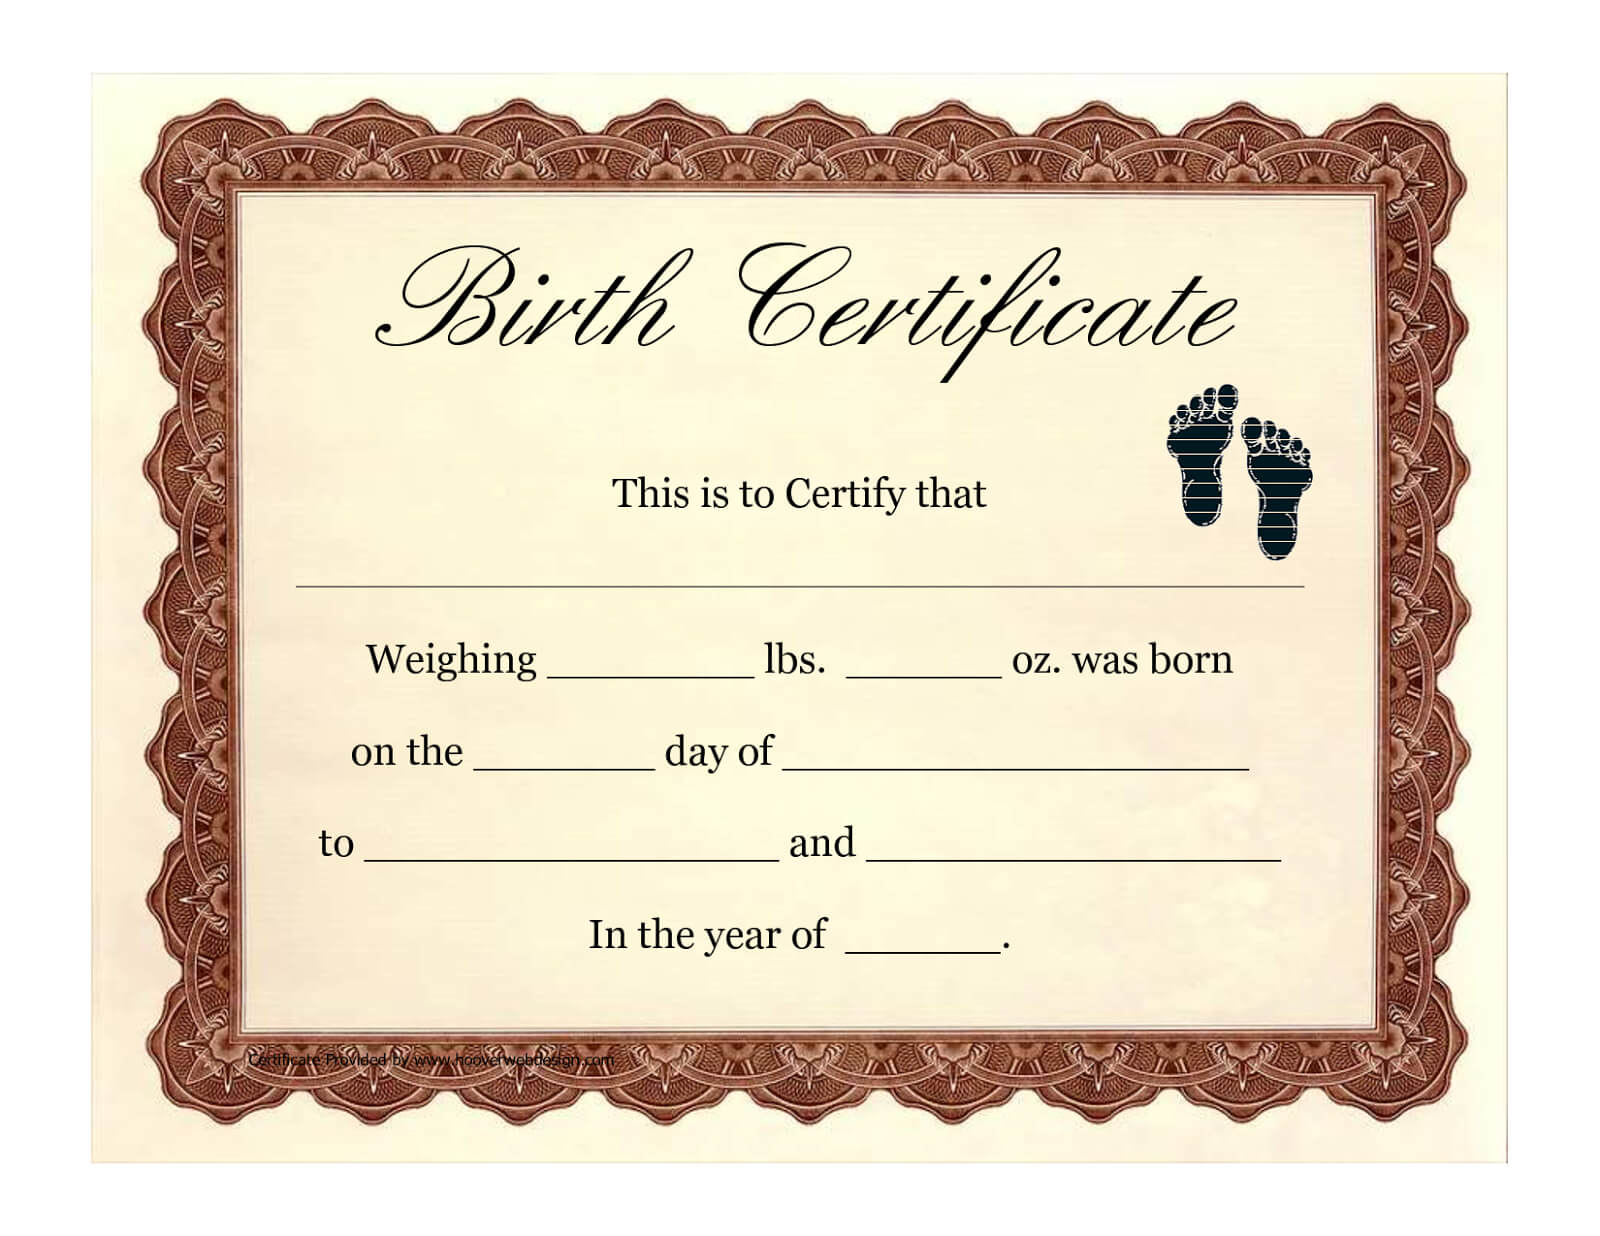 Attest Your Birth Certificate In Ahmedabad, Pune For Girl Birth Certificate Template